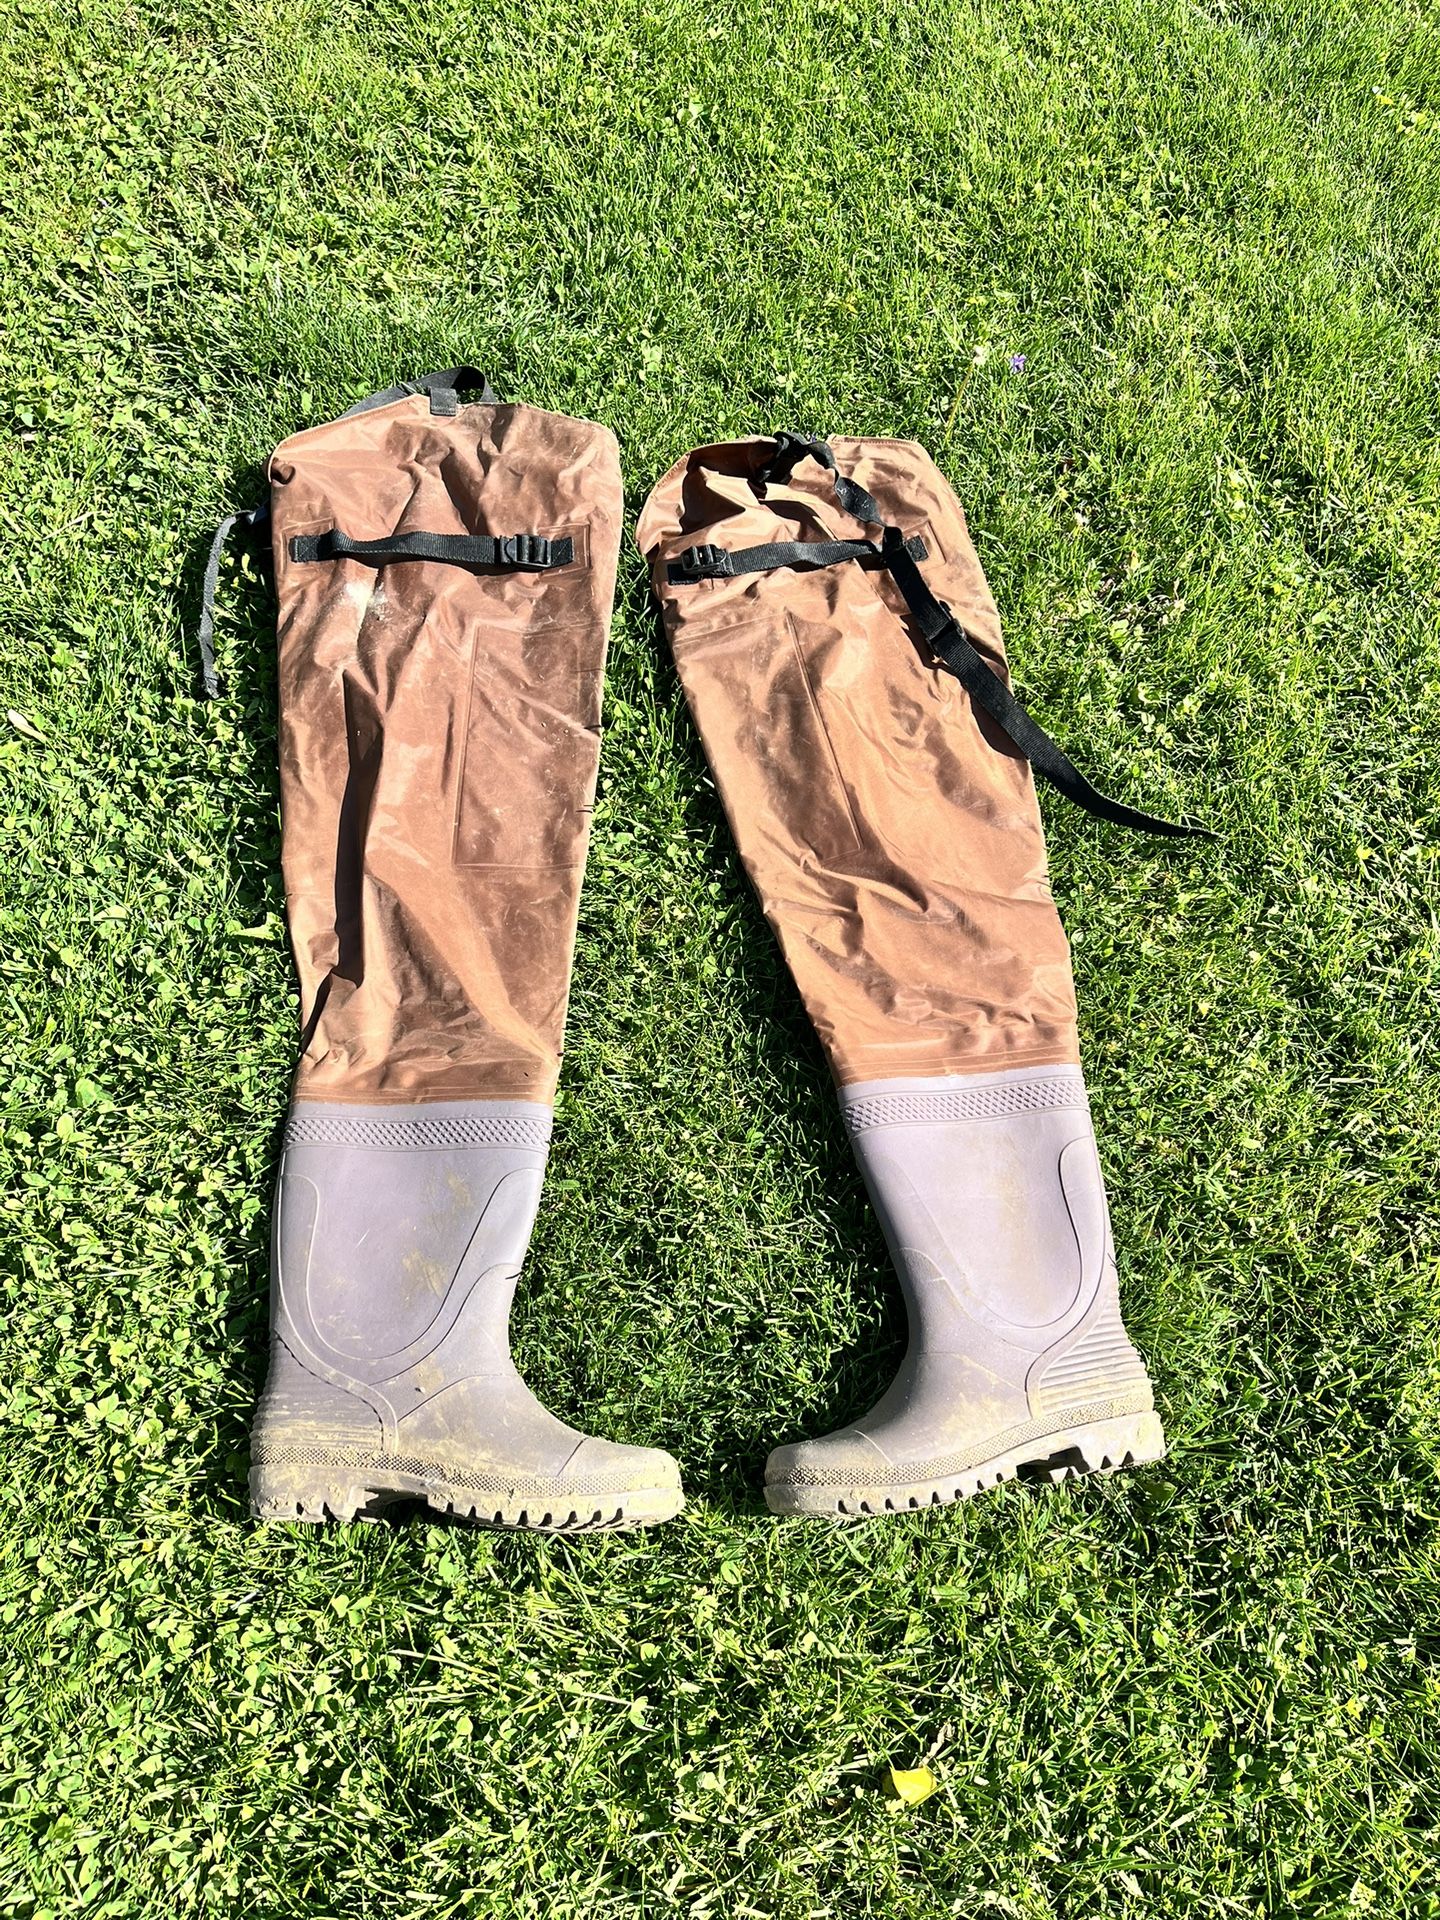 Hip Boots/Waders Size 11